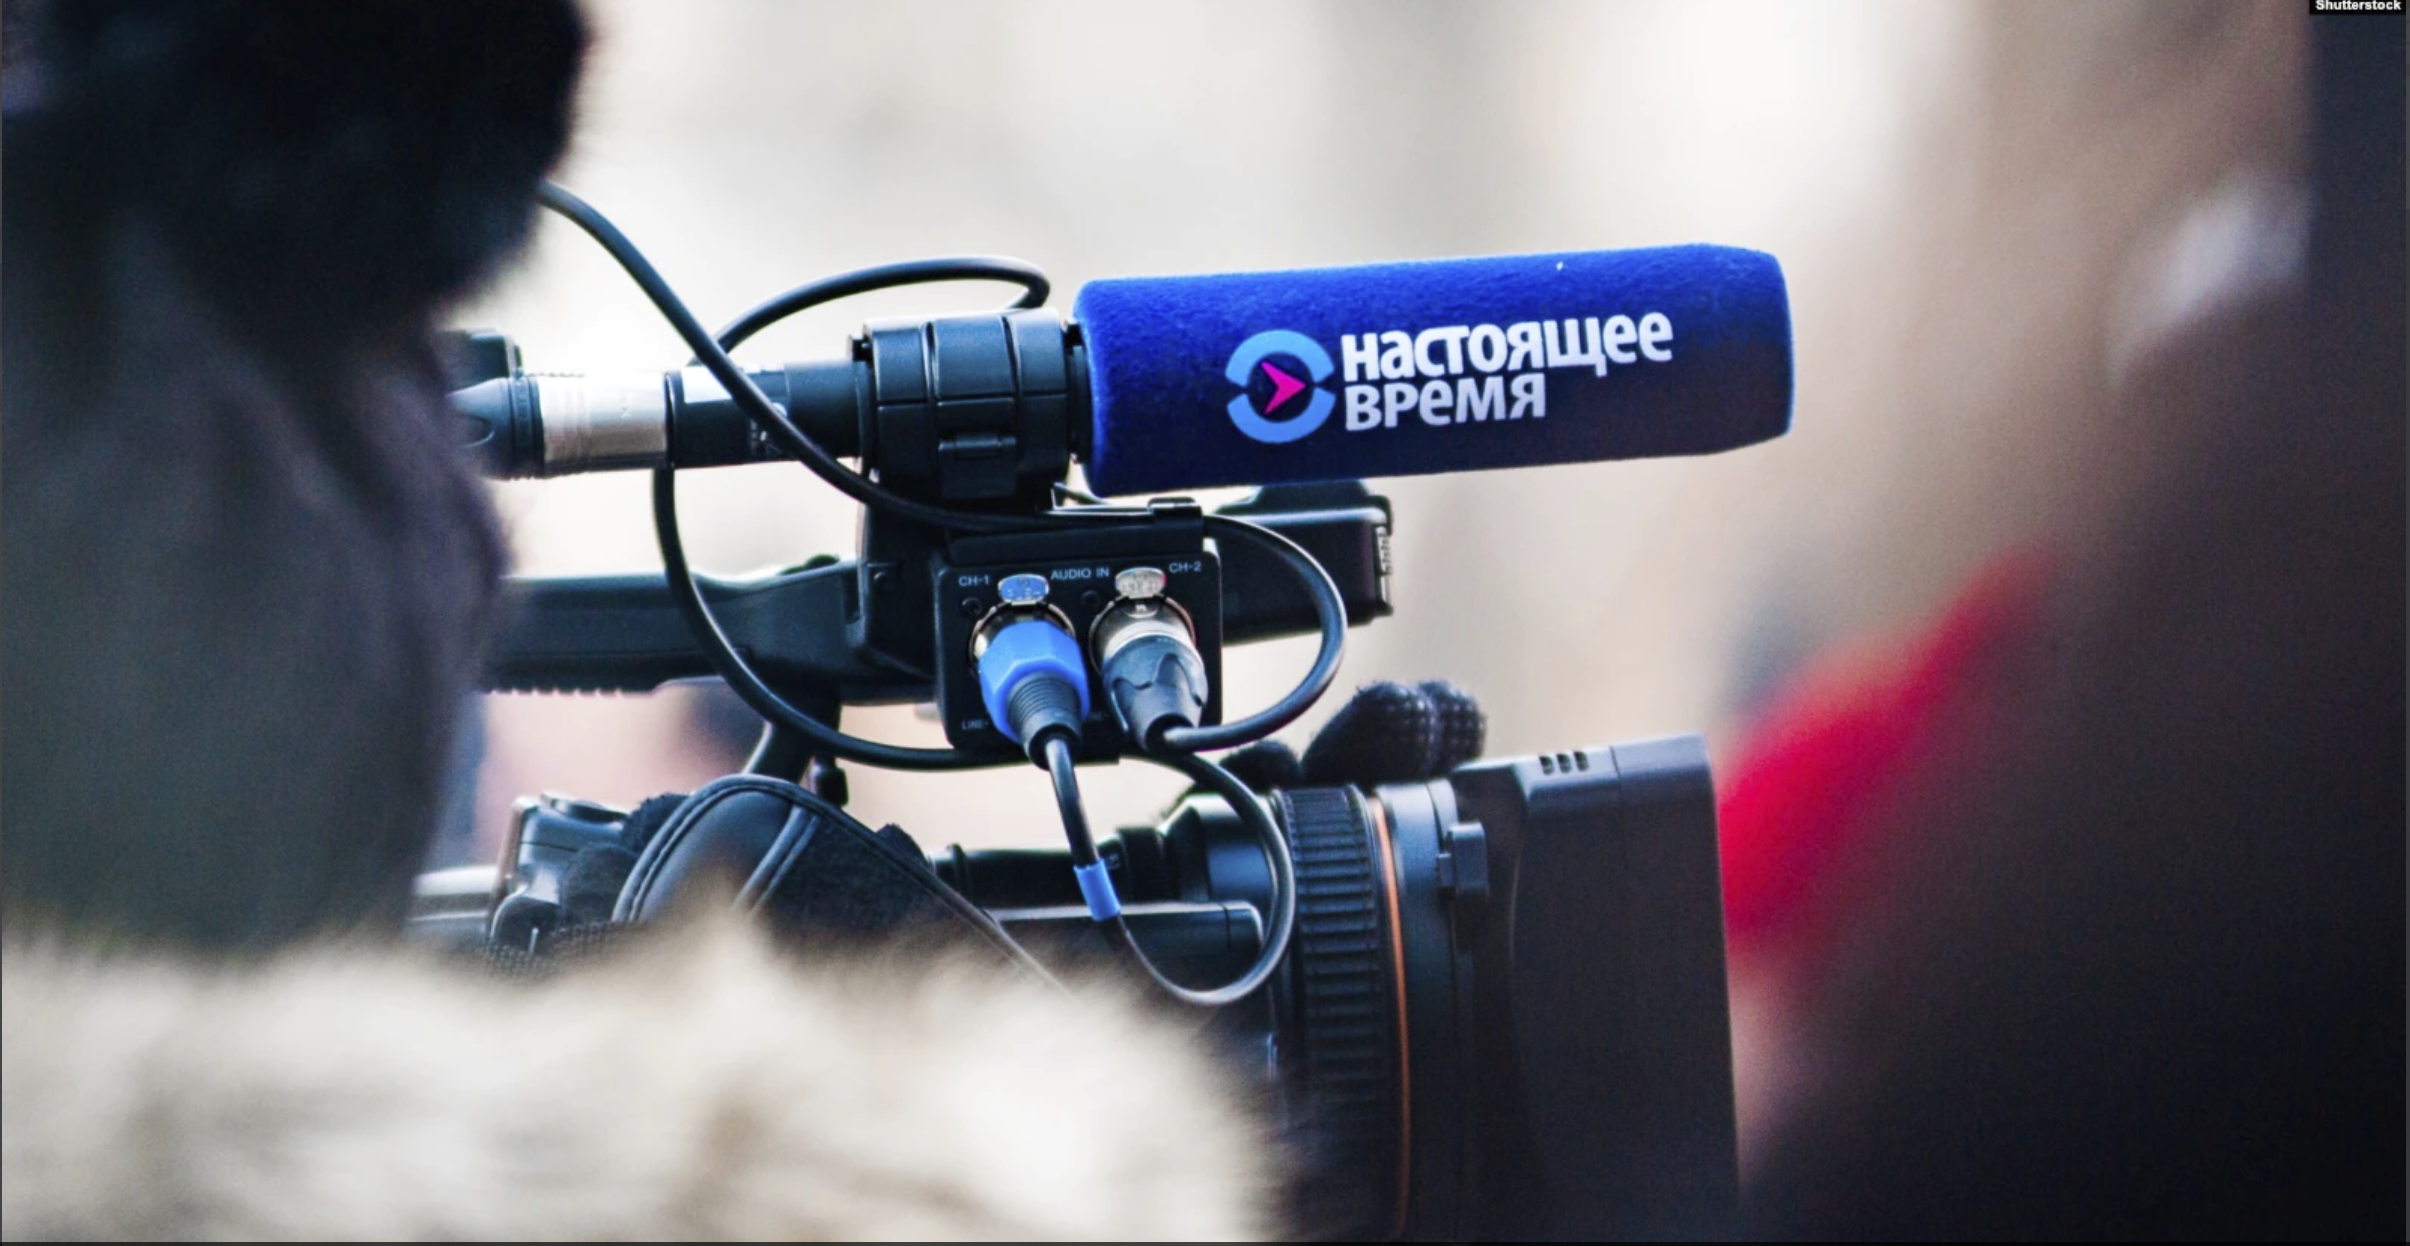 RFE/RL strongly condemns blockage of Russian-language websites and harassment of journalists